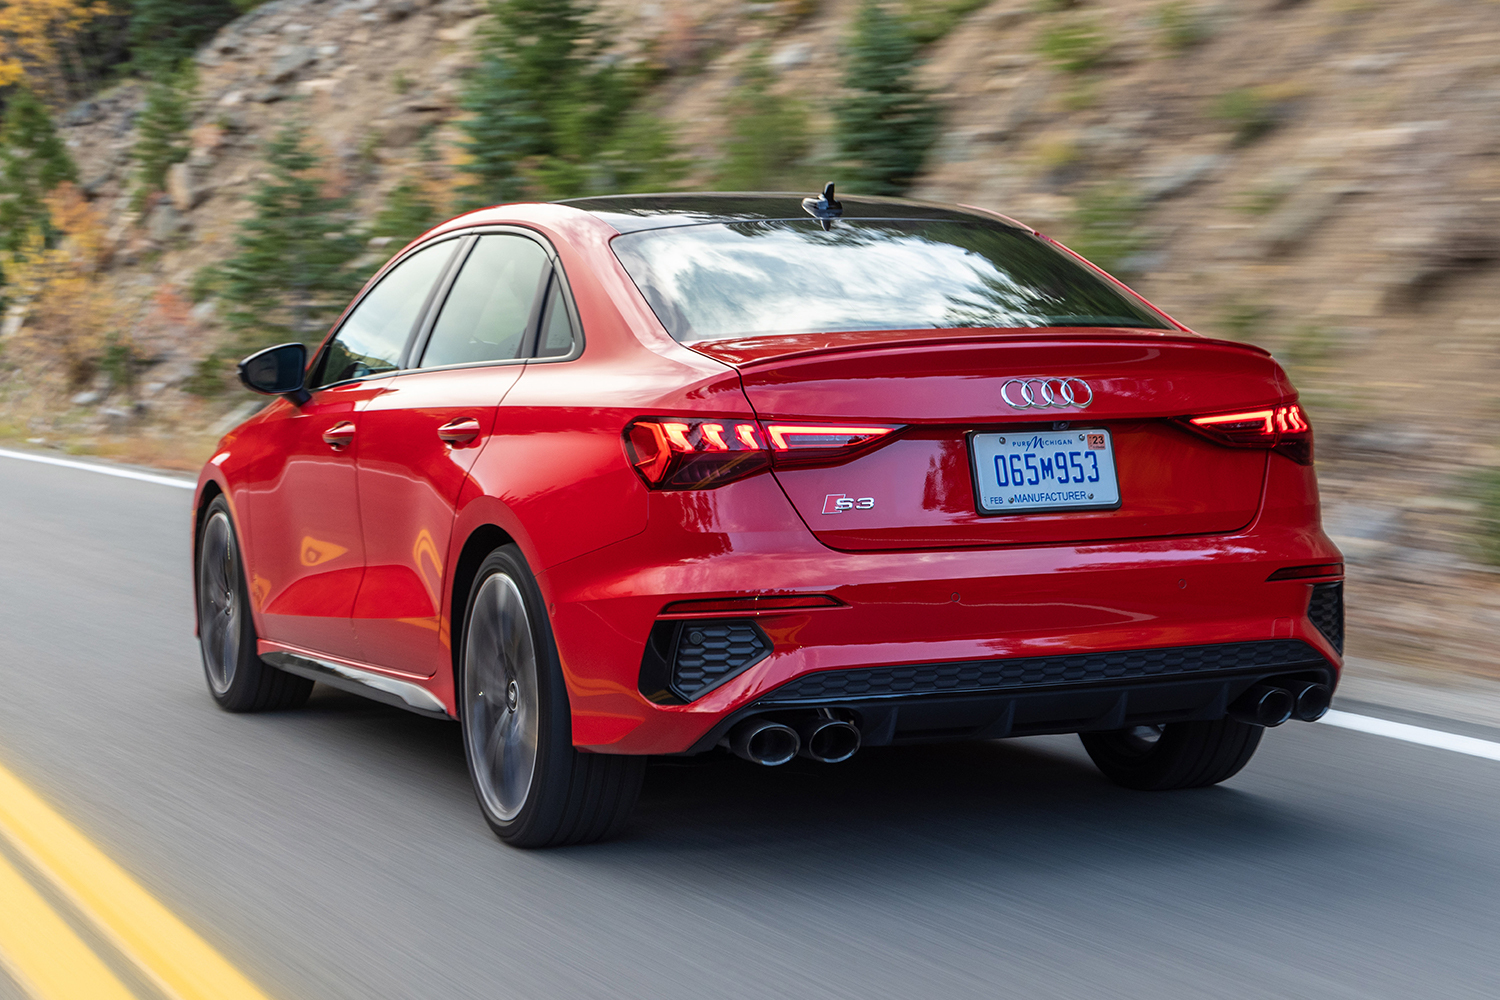 The 2022 Audi S3 in red driving down the road, shown from the rear end